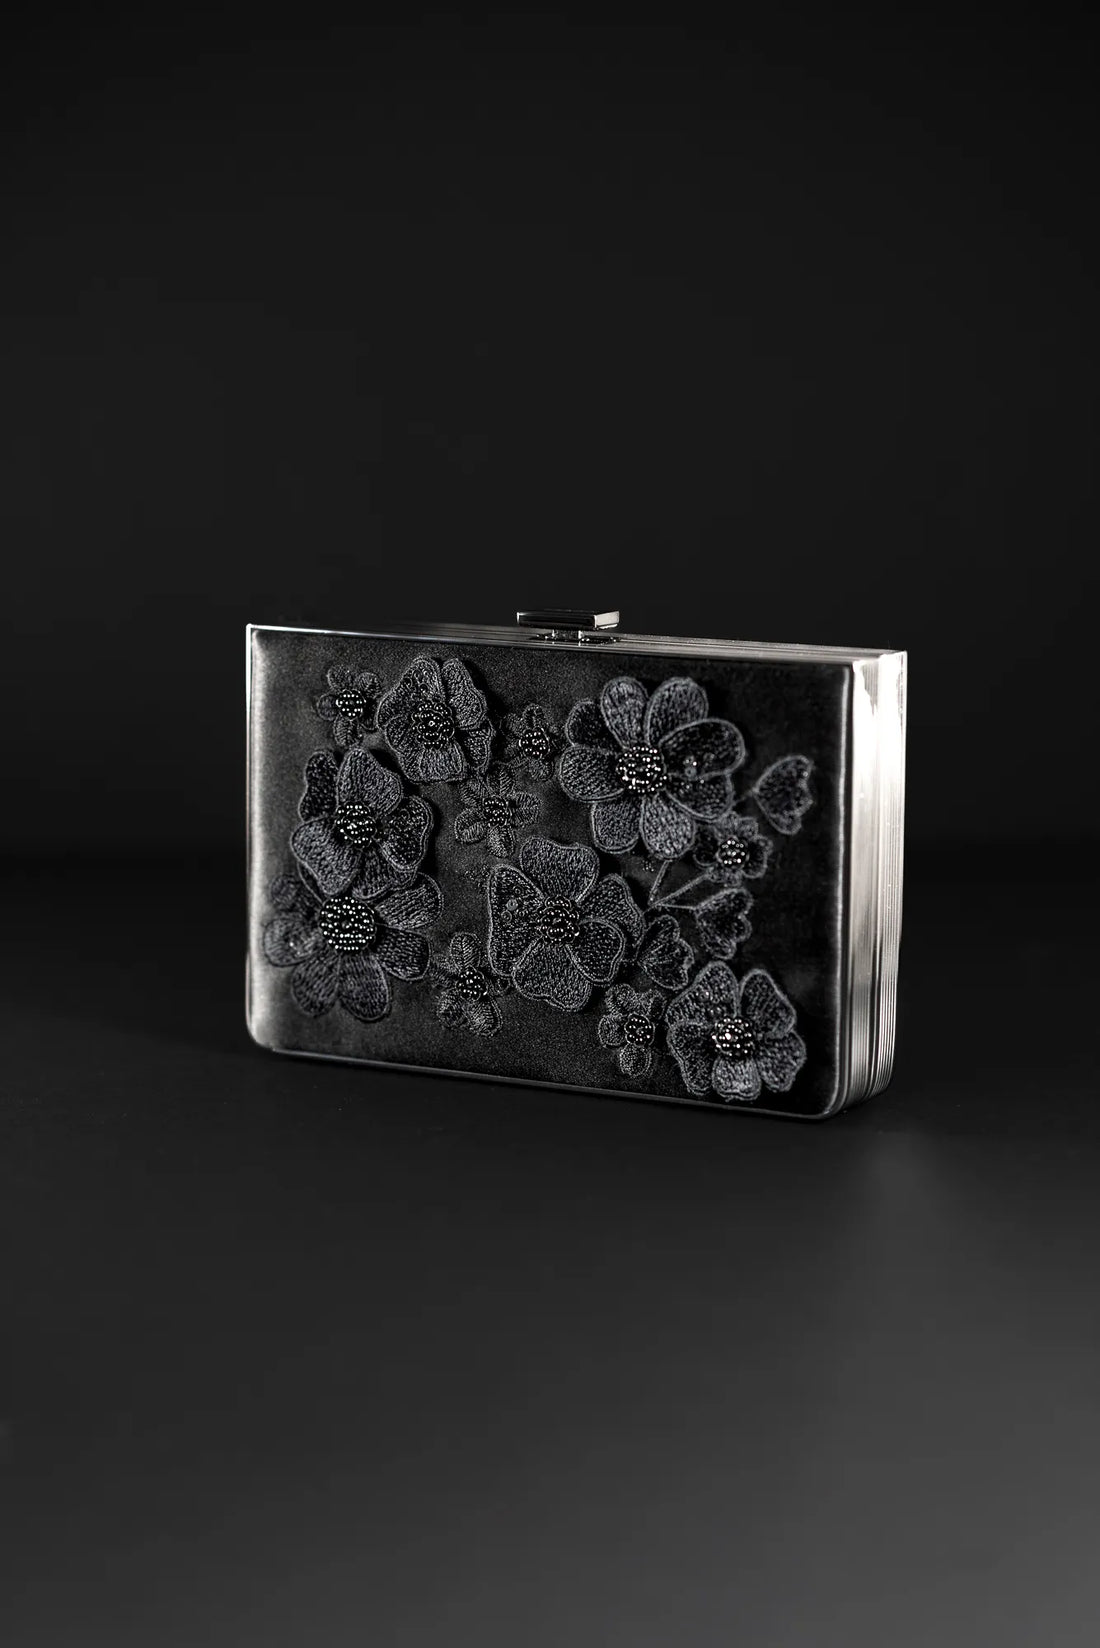 An exclusive Venezia Clutch x MICAELA - Black Satin Floral Embroidery from The Bella Rosa Collection adorned with exquisite 3D Floral Embroidery.